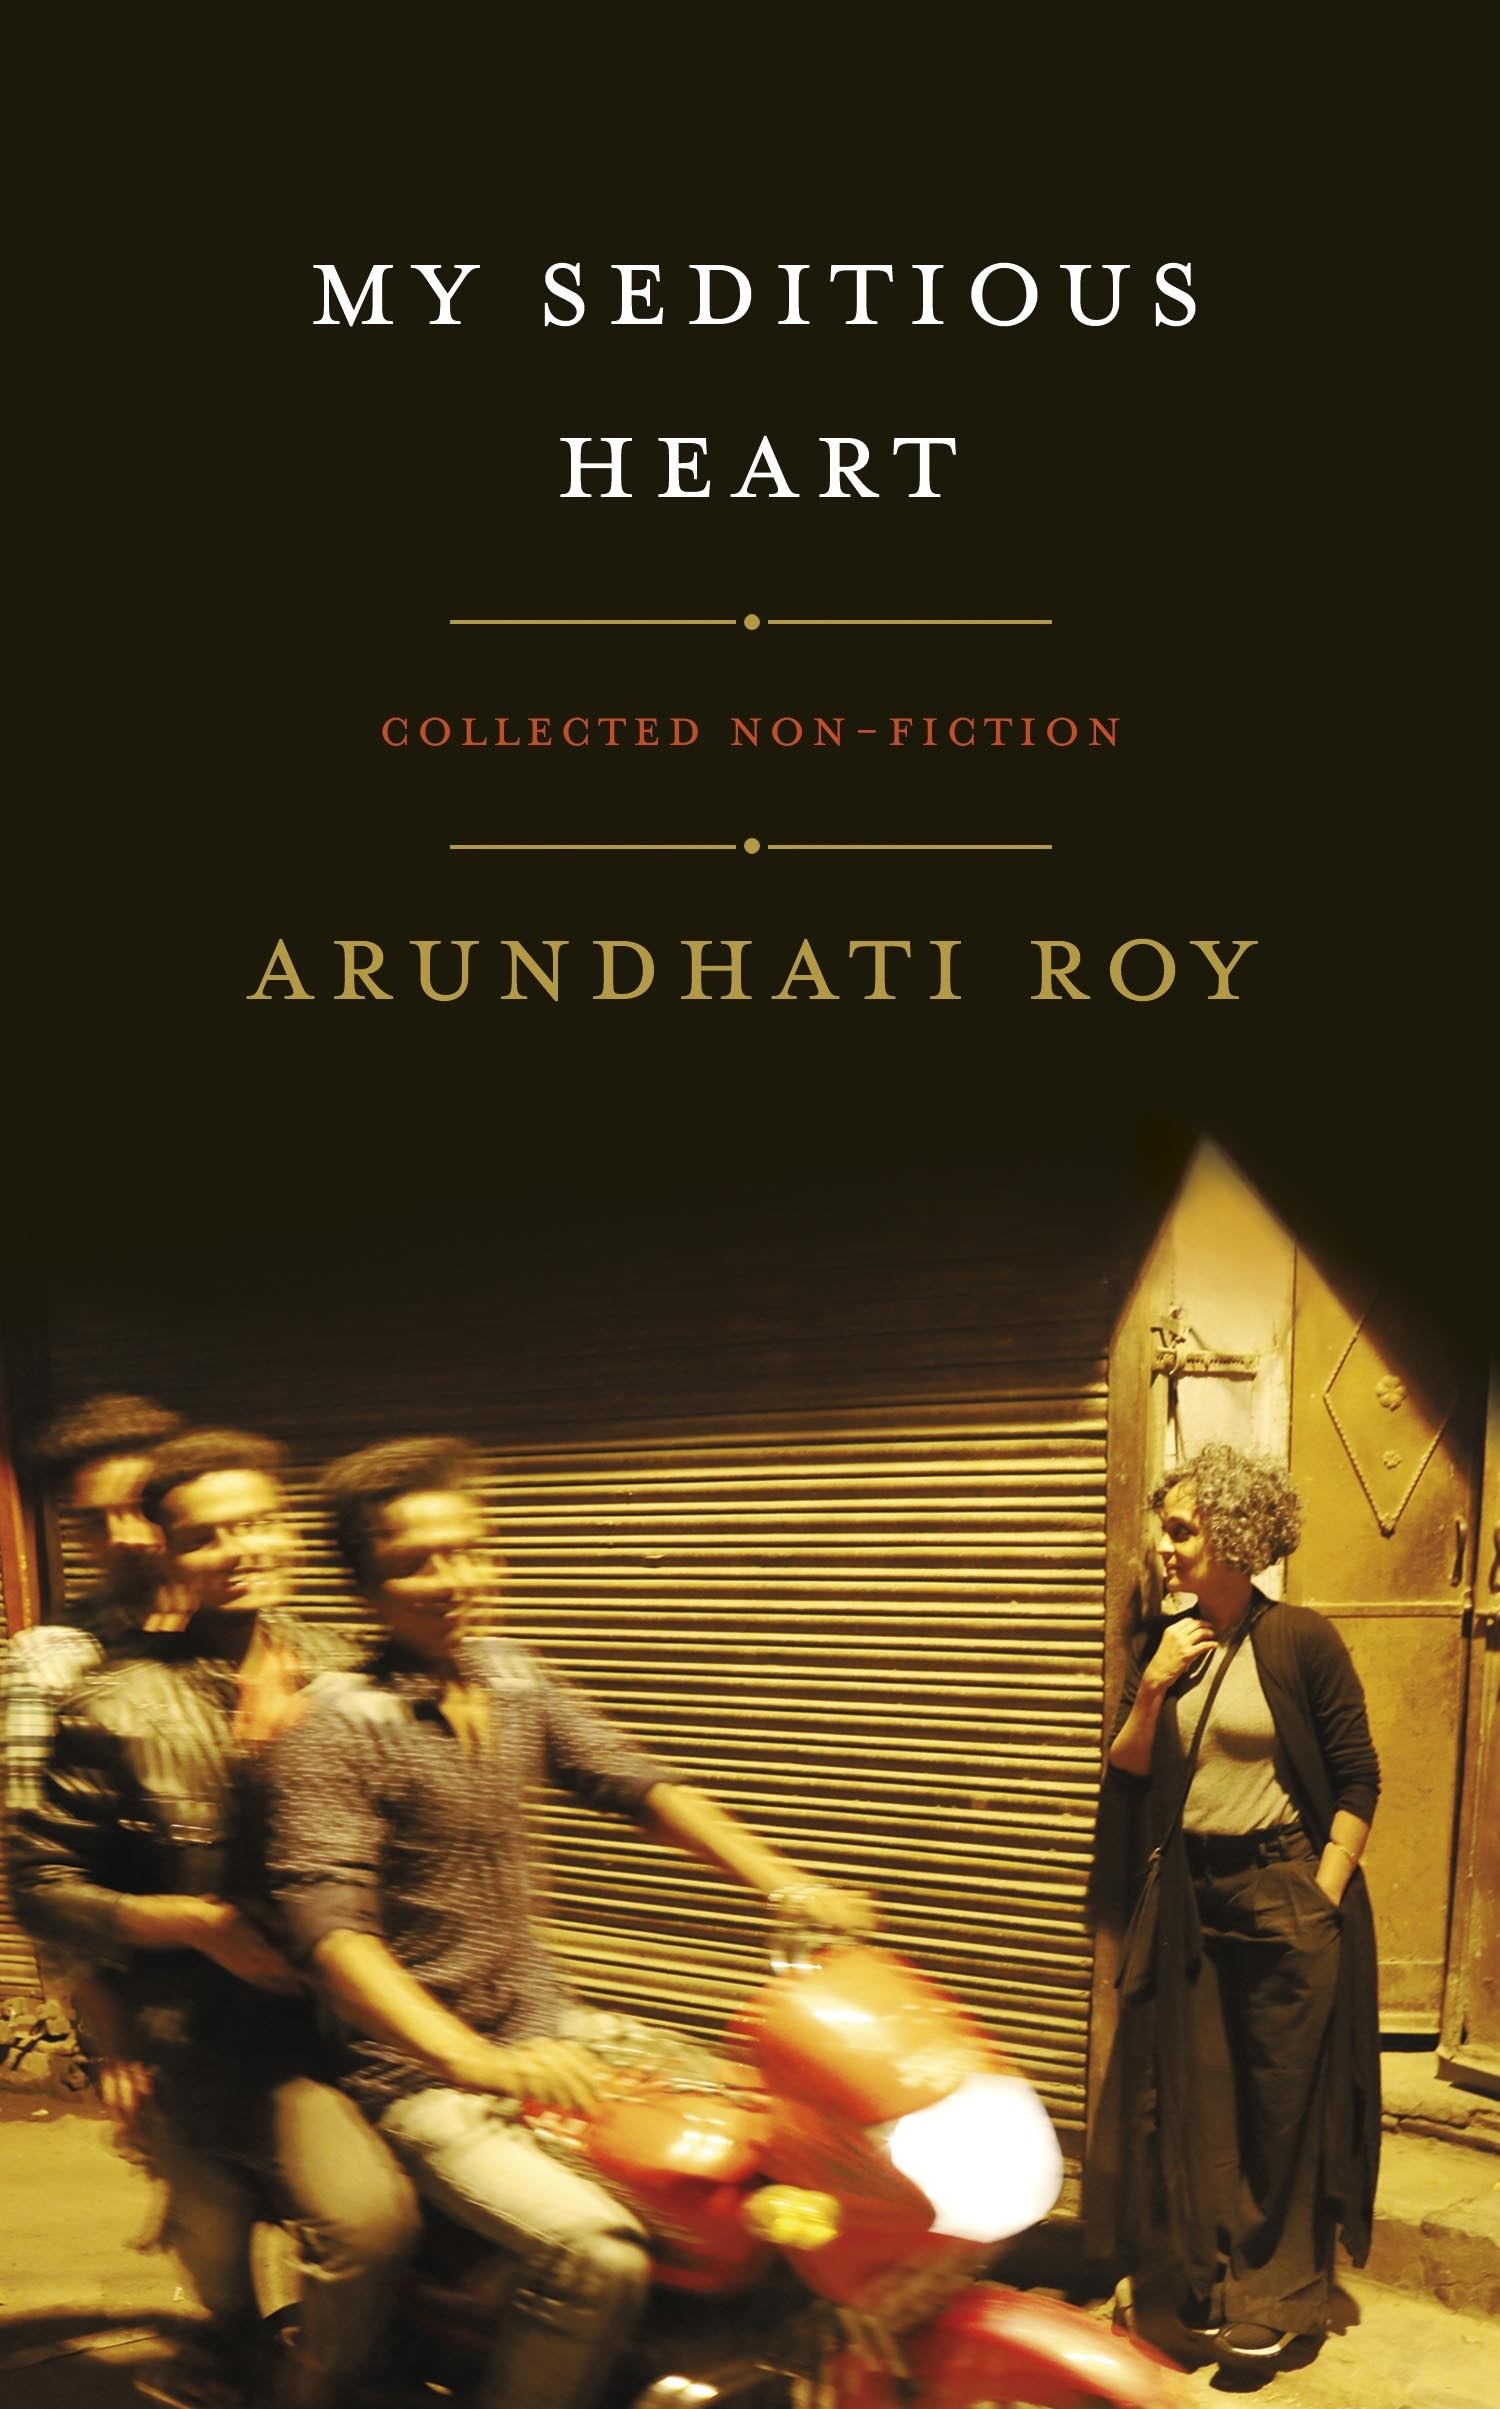 Book “My Seditious Heart” by Arundhati Roy — June 6, 2019